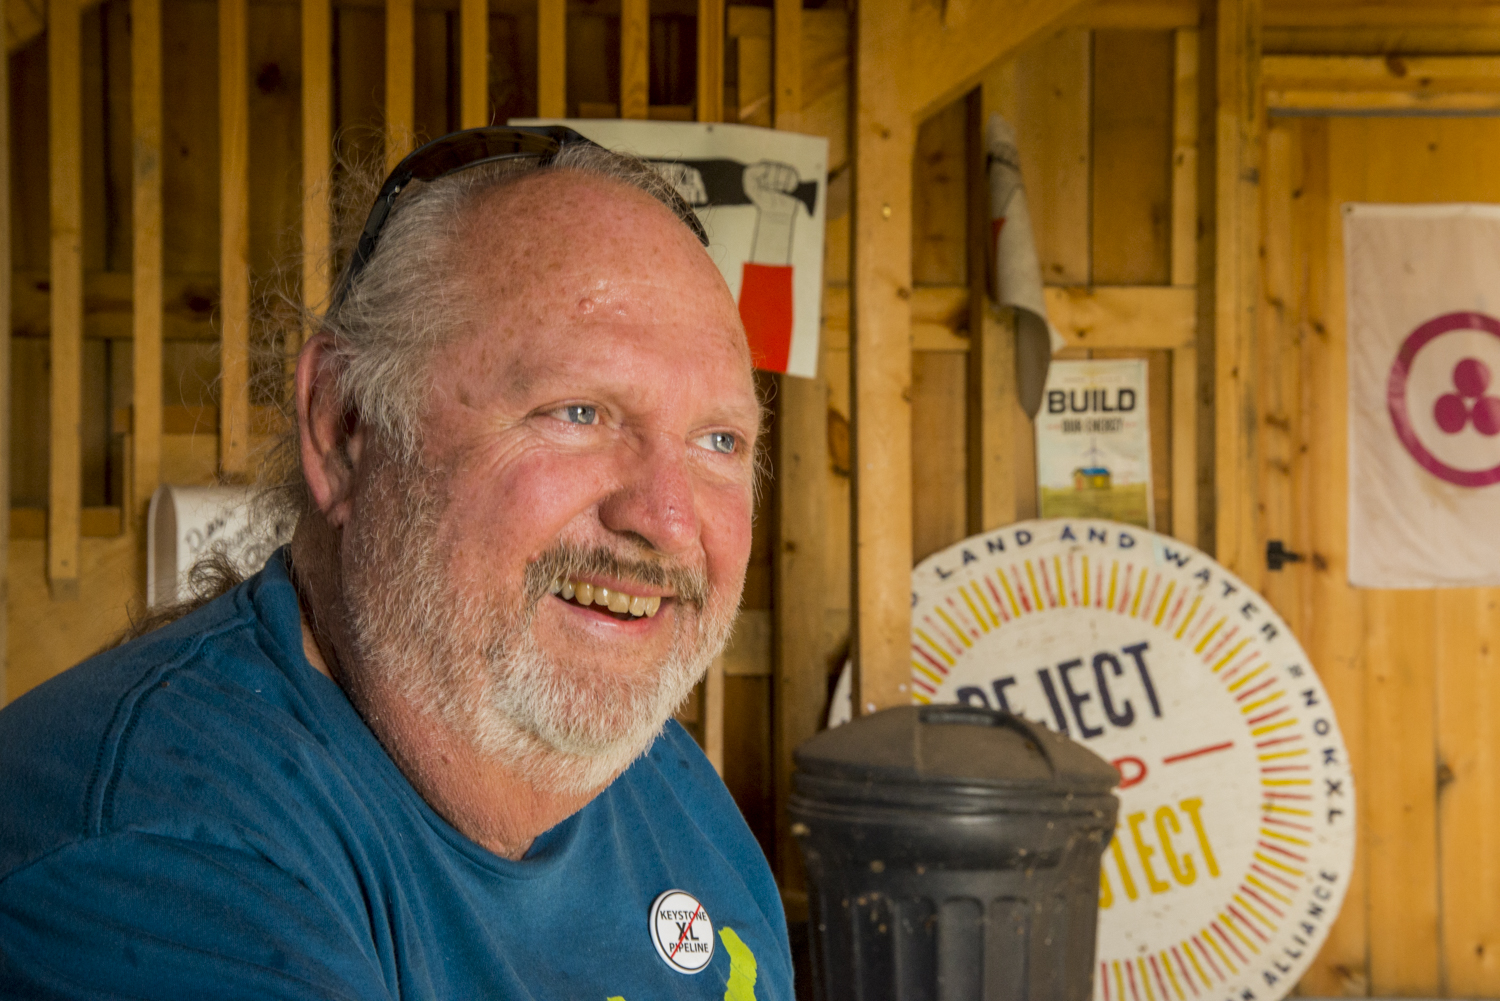 USA: Nebraska, No Water No Life, NWNL, Missouri R-Tribs Expedition, west of Benedict  (York Co, pop 236), interview with Tom Genung inside "Energy Barn" built 2013 on proposed Keystone XL route by "pipeline fighters" with 1 kw energy system from solar & wind